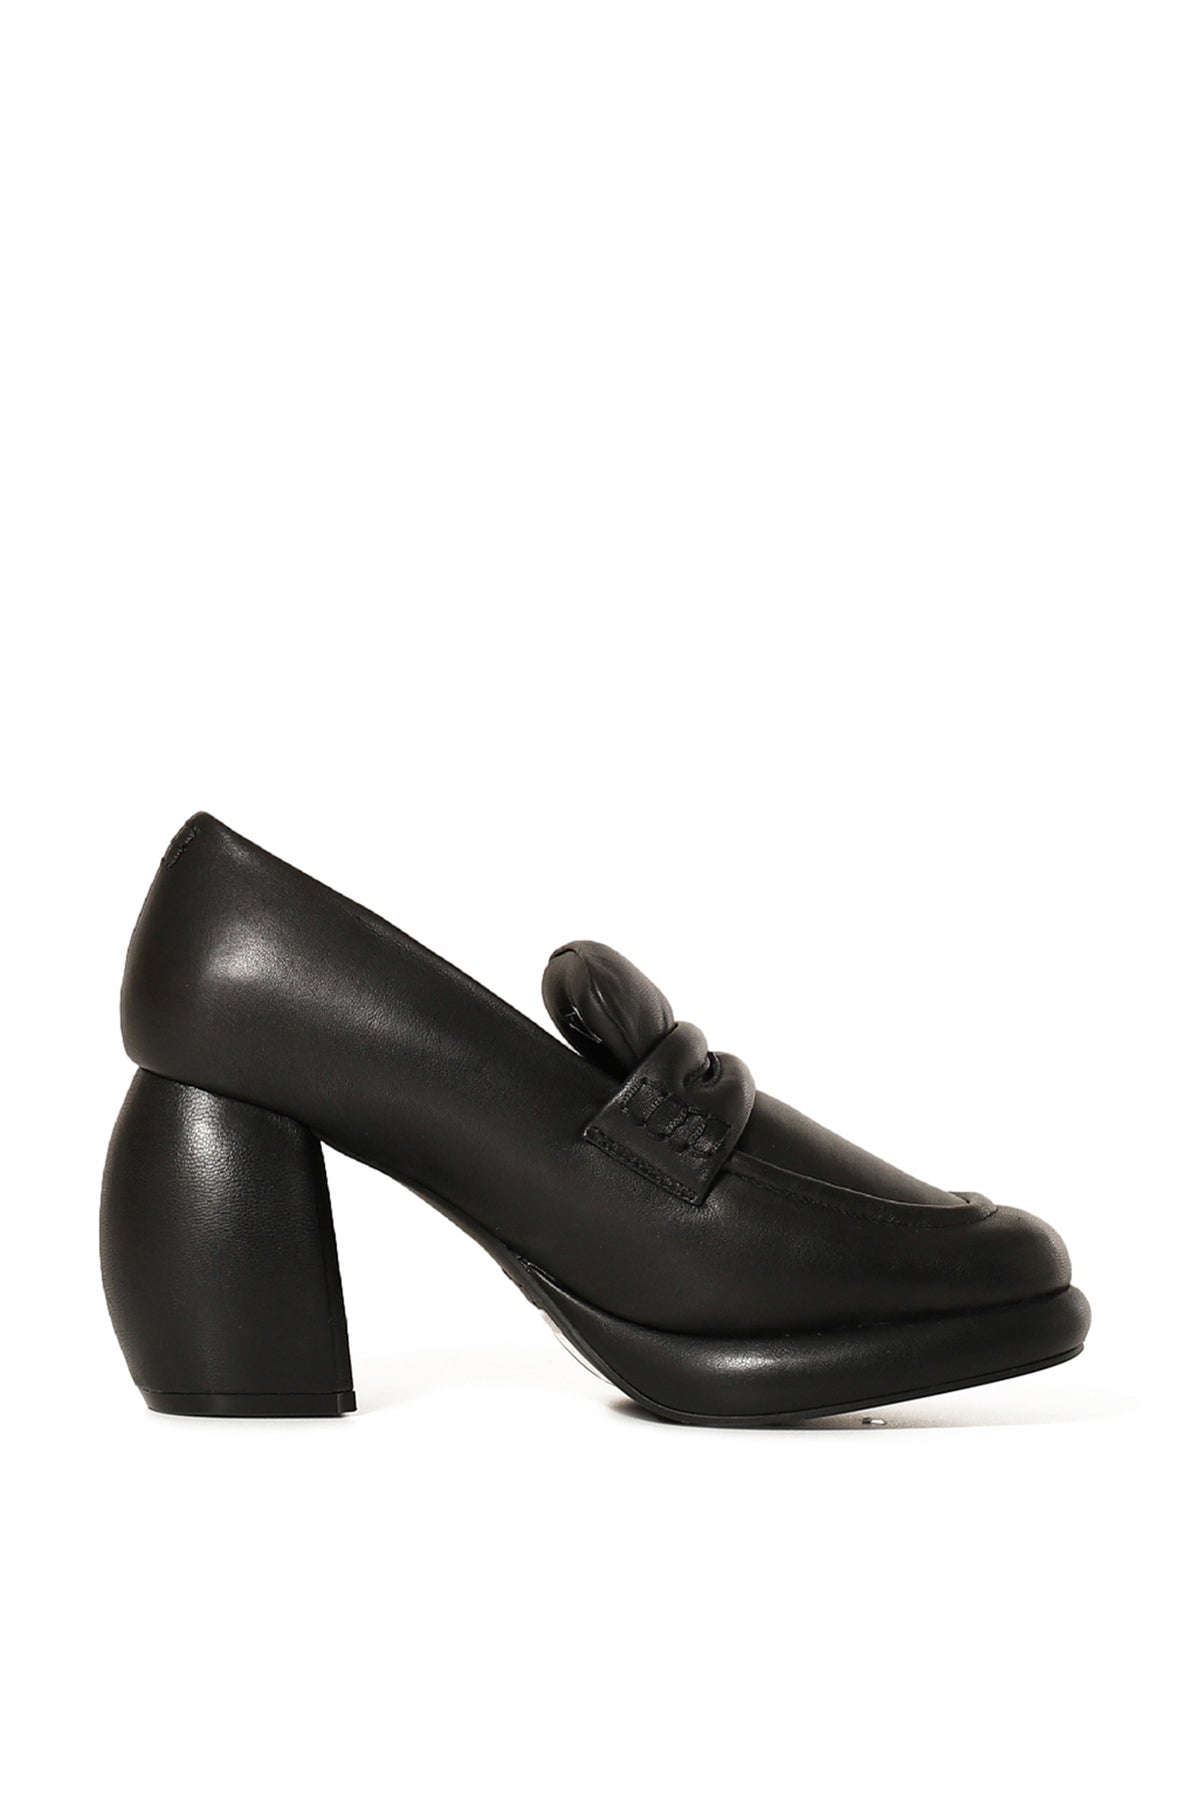 THE LOAFER1 / BLACK LEATHER